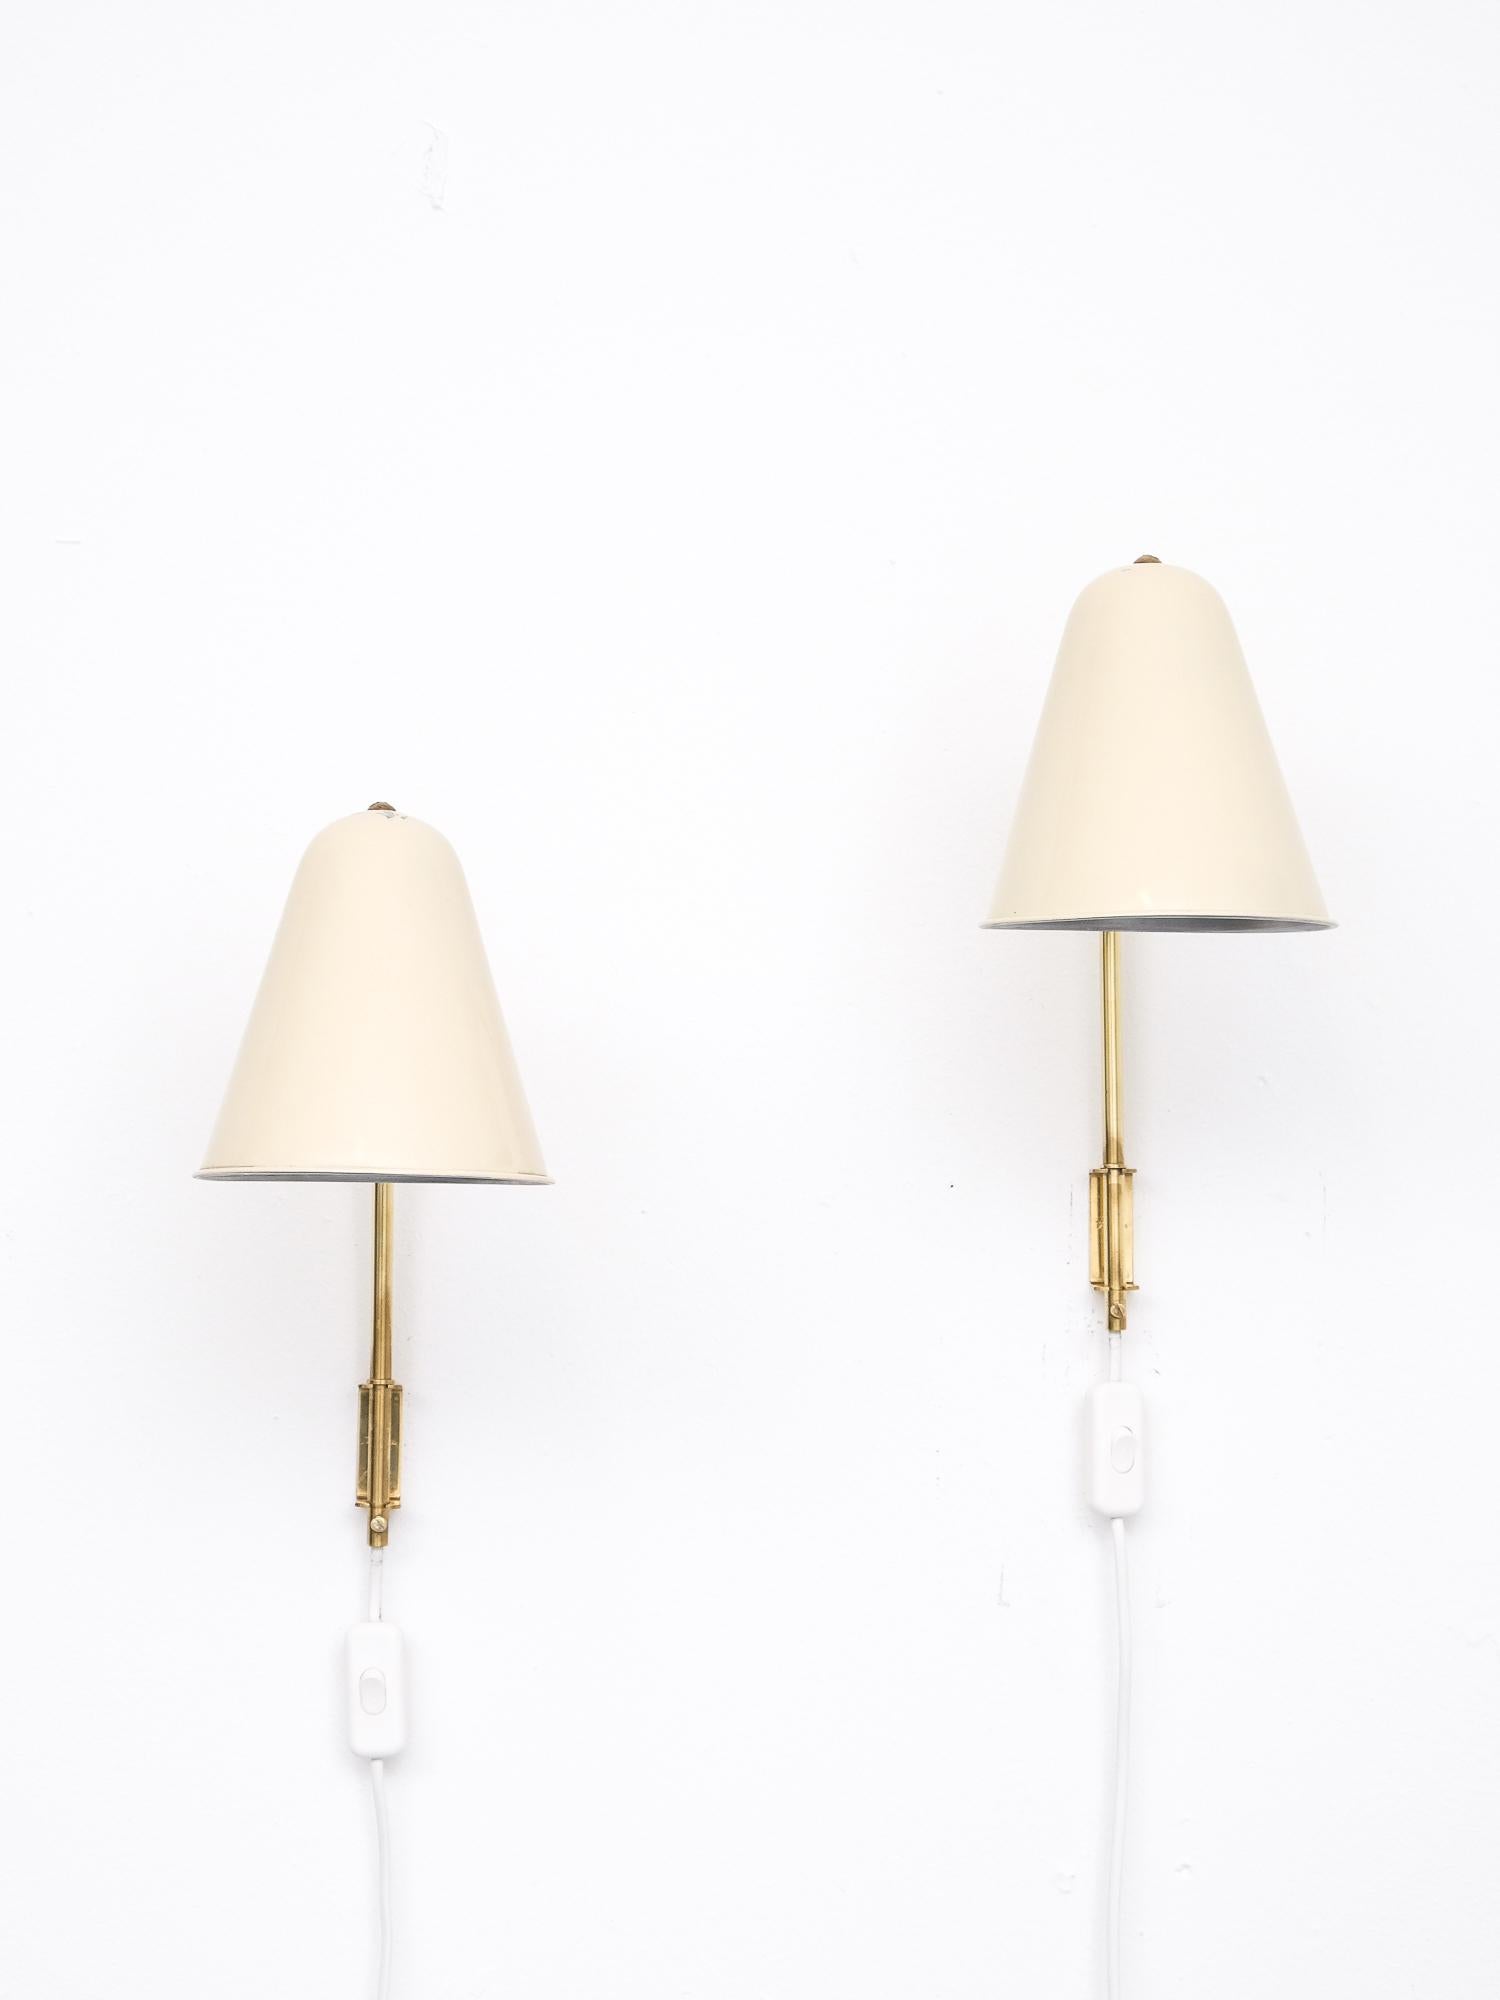 A pair of 1950s solid brass adjustable wall lamps with cream color painted shades. A beautiful and elegant design by Paavo Tynell for Idman Oy. Model number 71030.